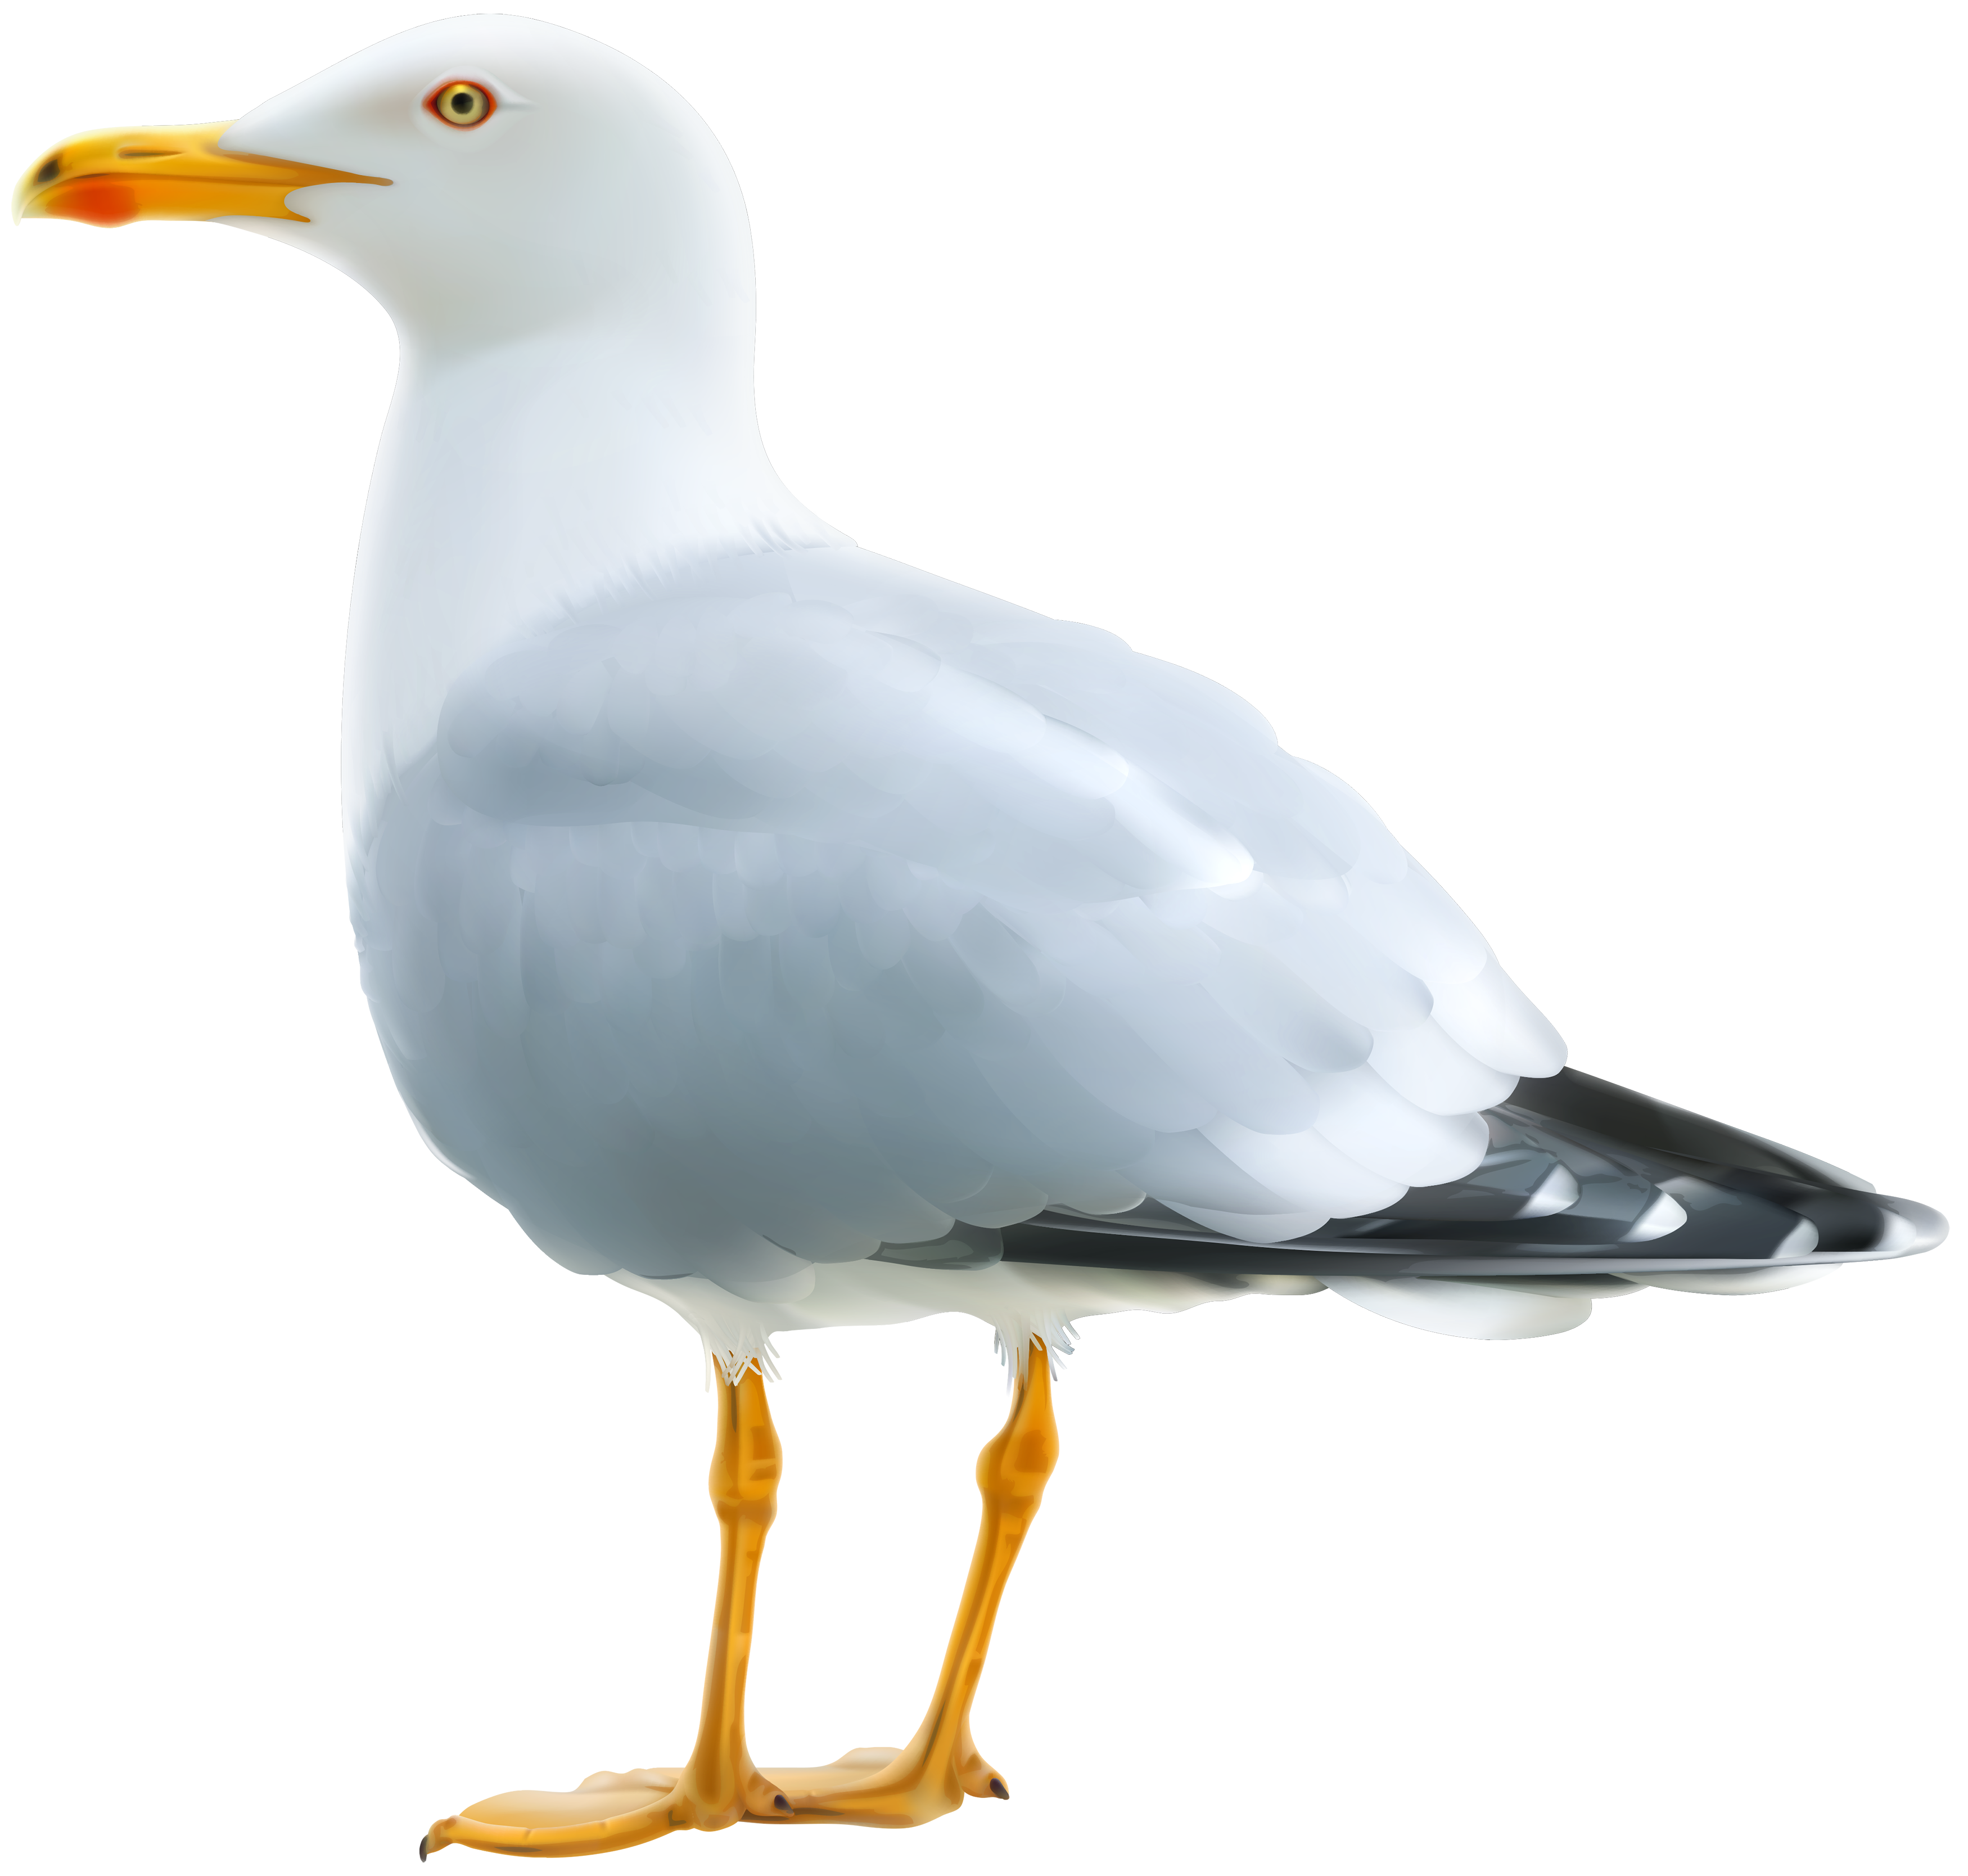 Seagull PNG Clipart Image